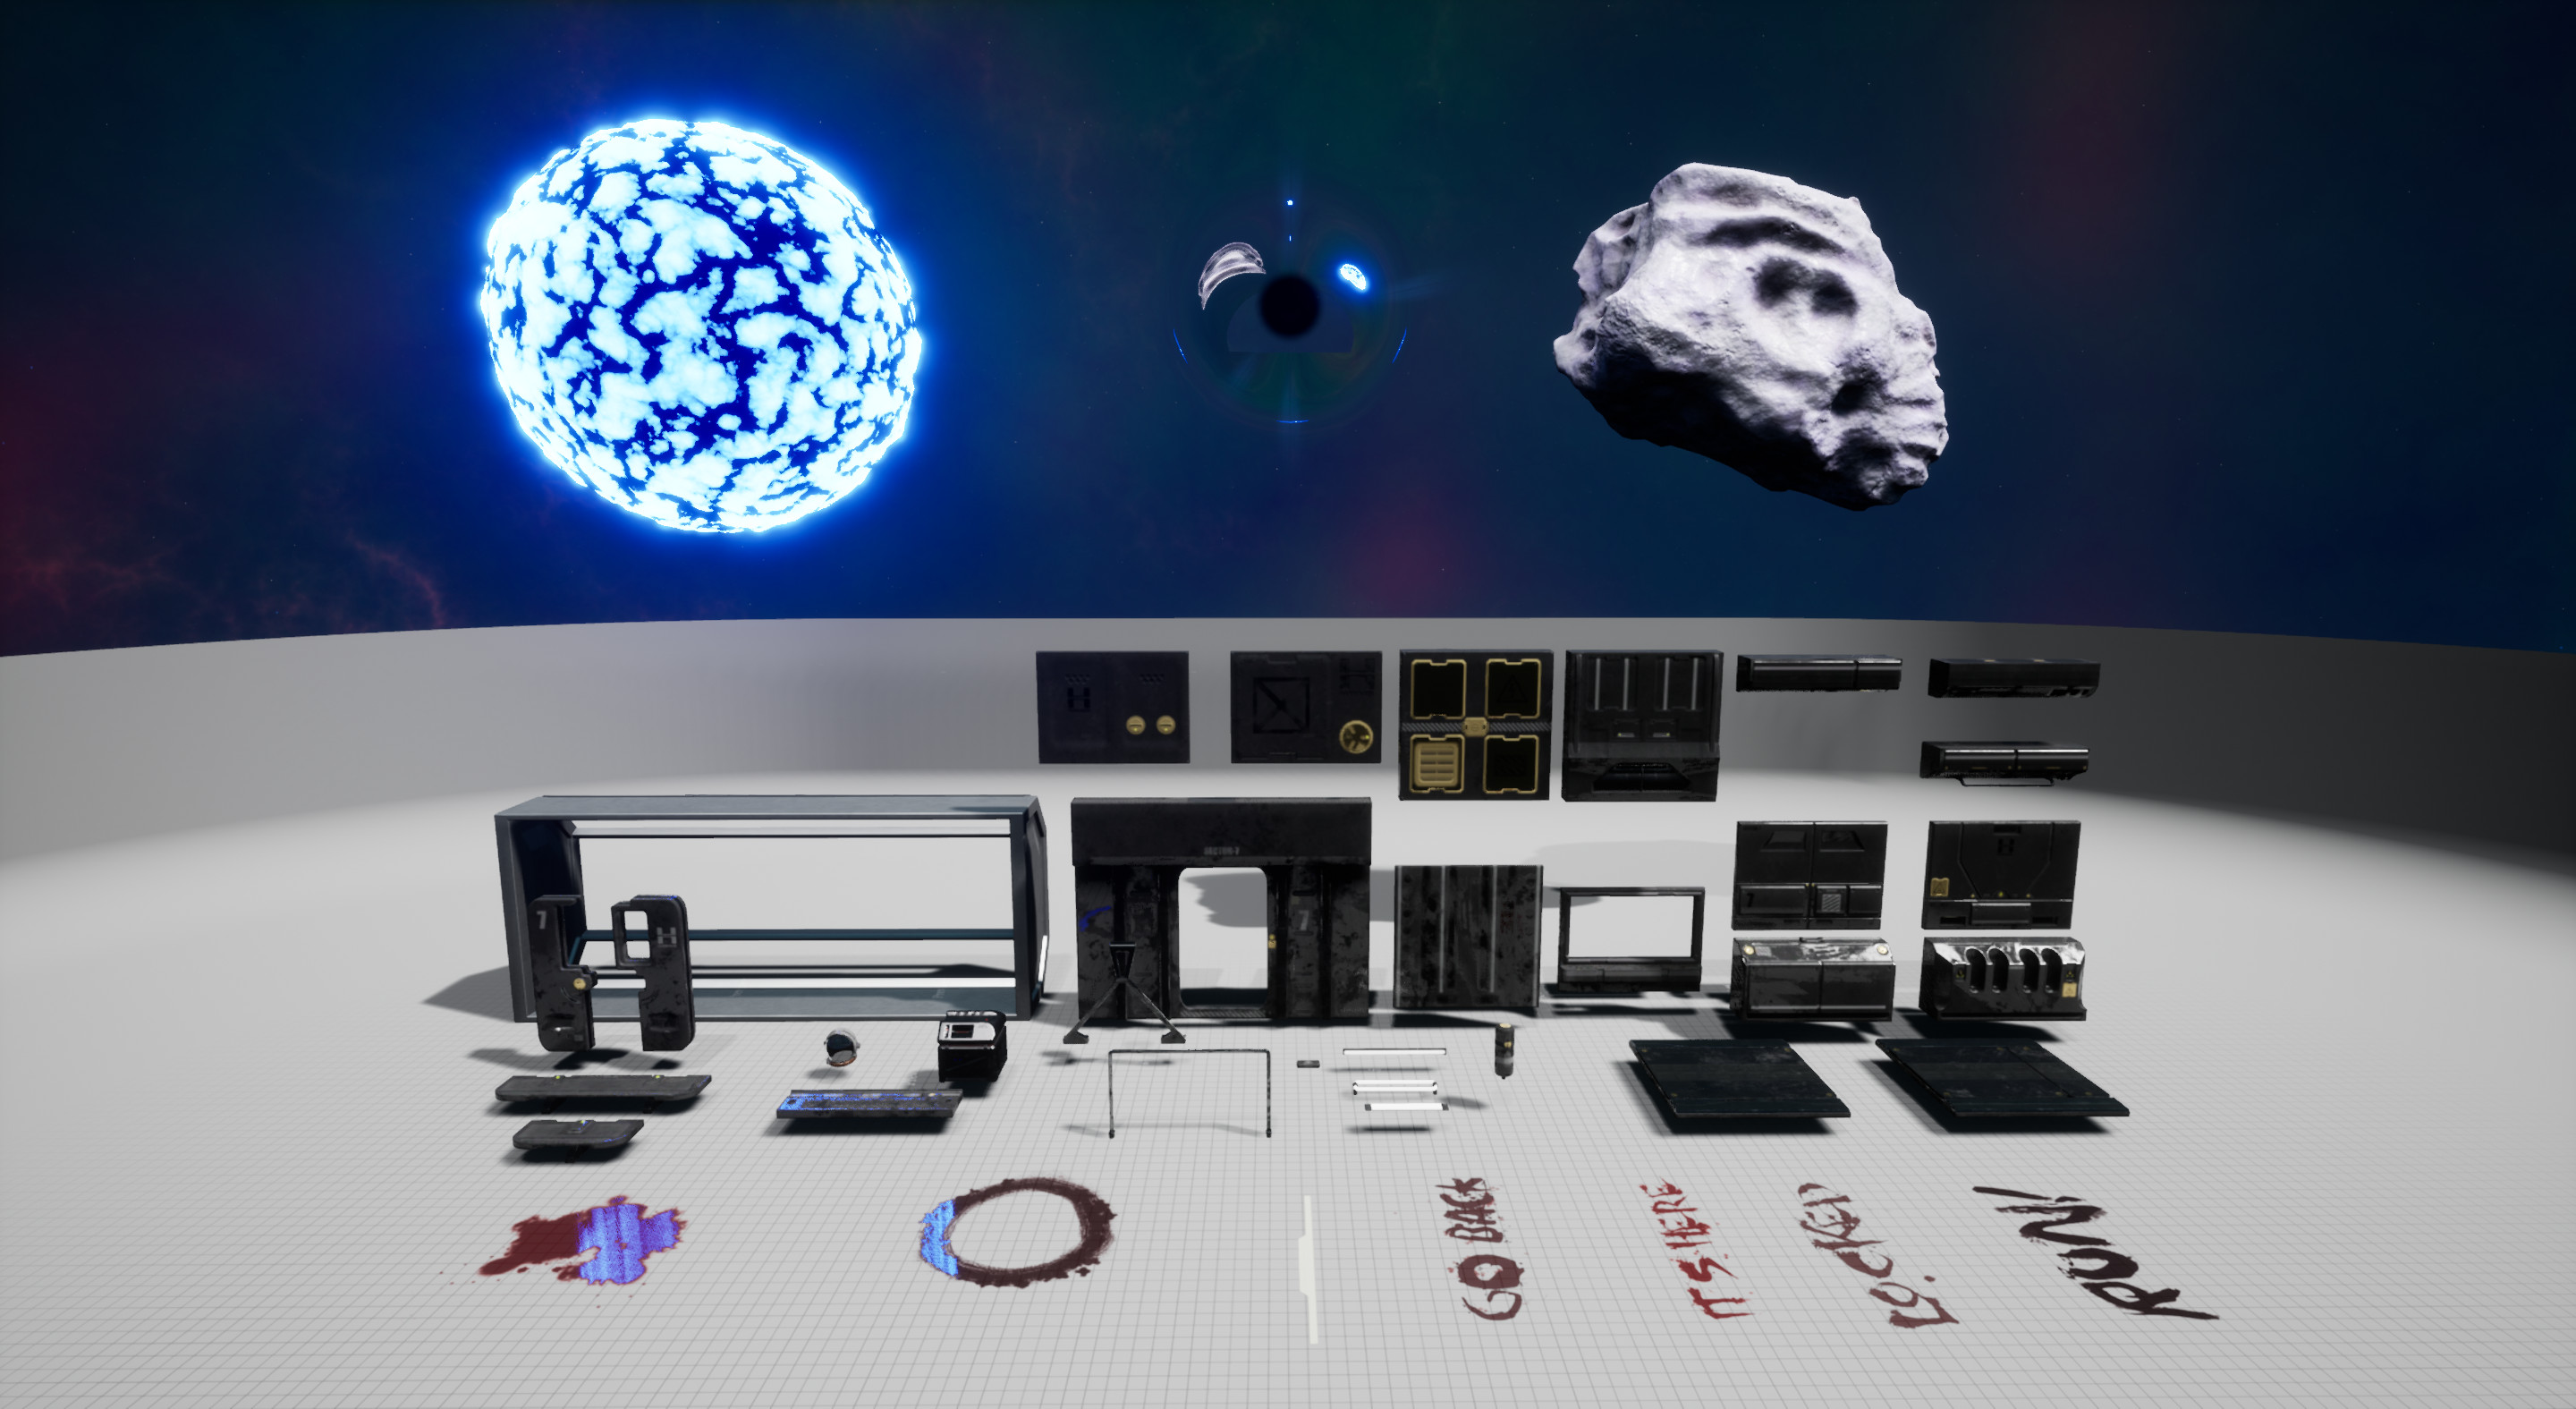 Assets Overview (33 static meshes, 13 Materials, 10 custom decals, 5 new shaders, custom space skybox)